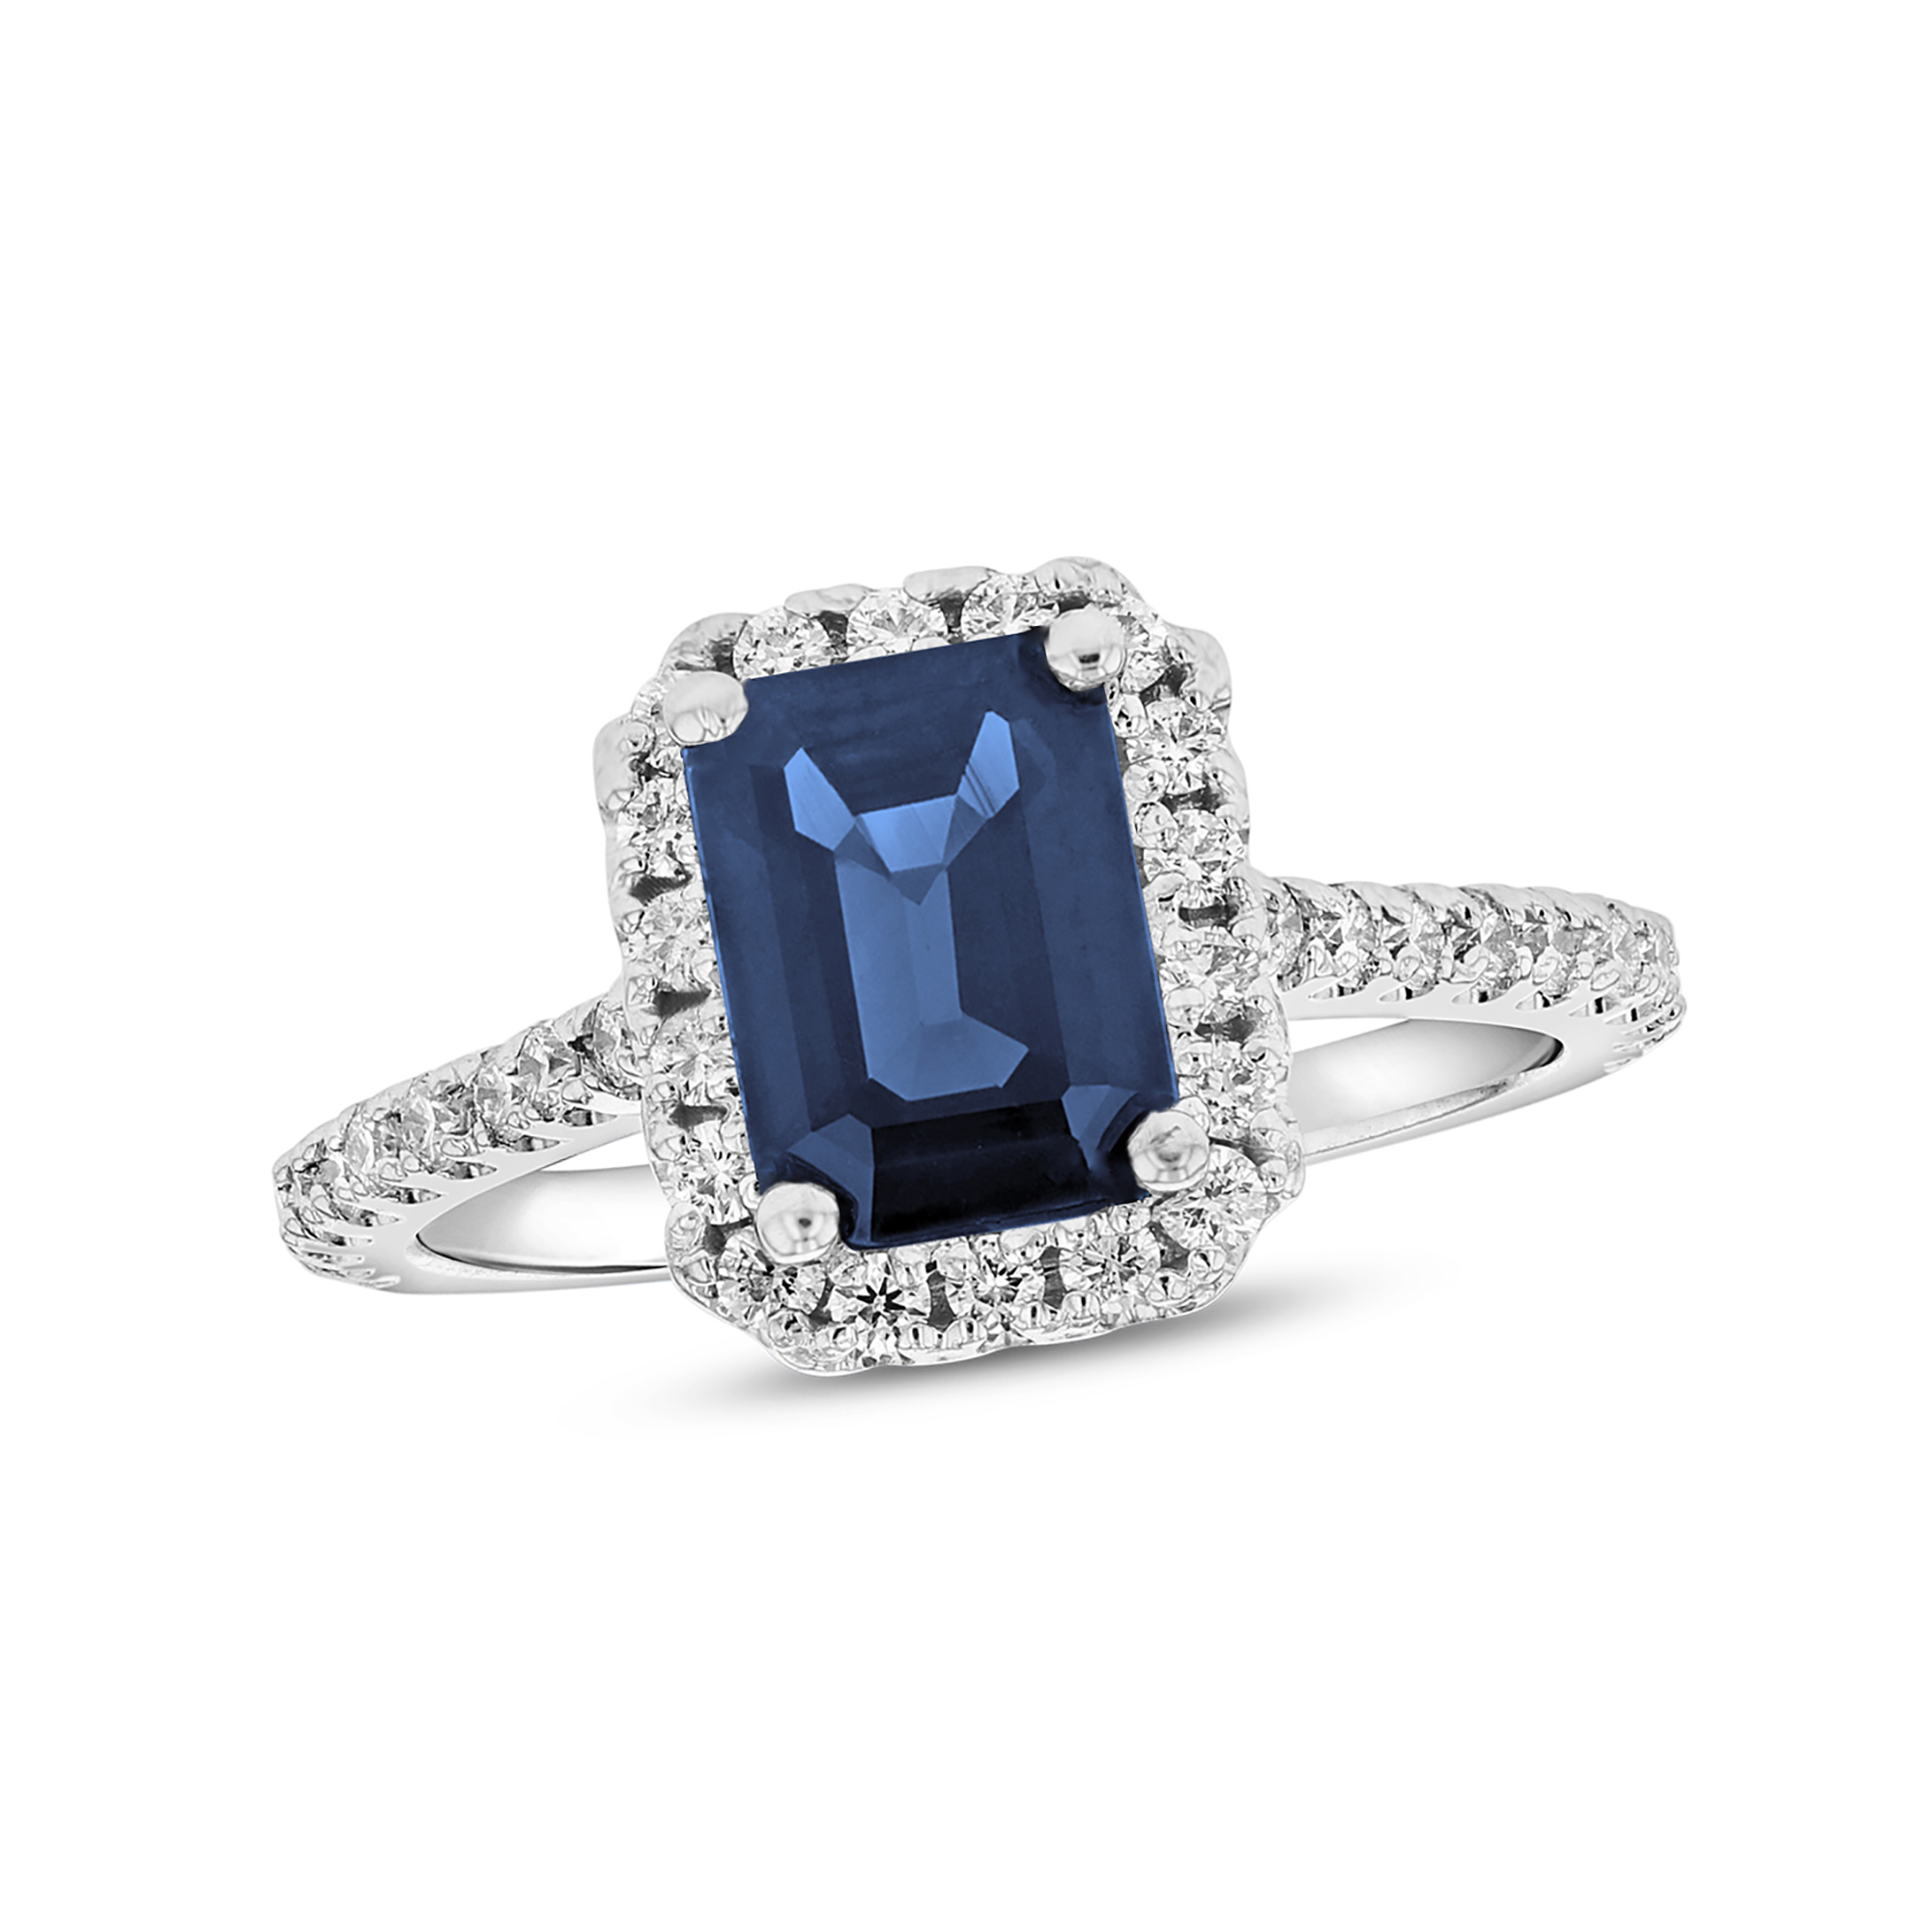 View 2.00ctw Diamond and Emerald Cut Sapphire Statement Ring in 14k White Gold